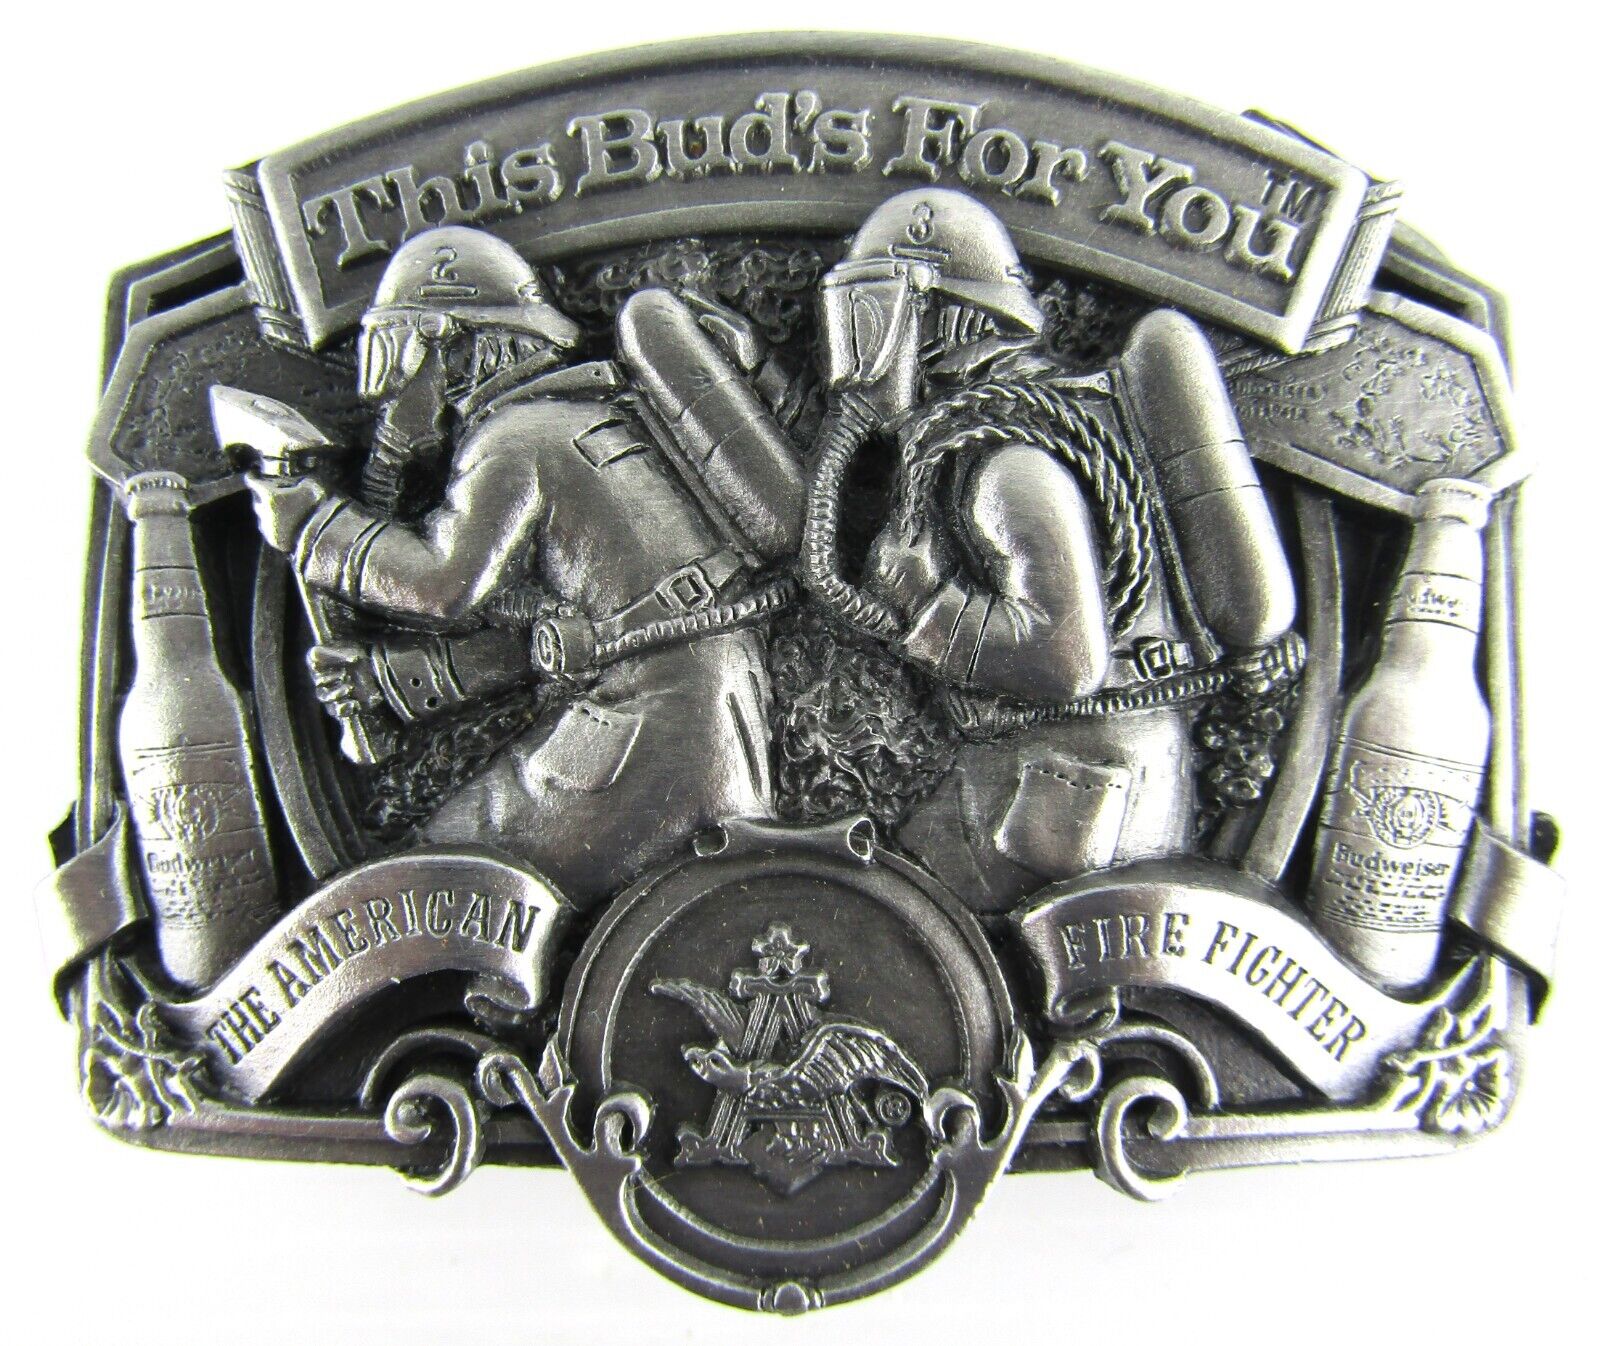 Vintage 1987 Anheuser Busch Firefighter Belt Buckle This Bud's For You Metal